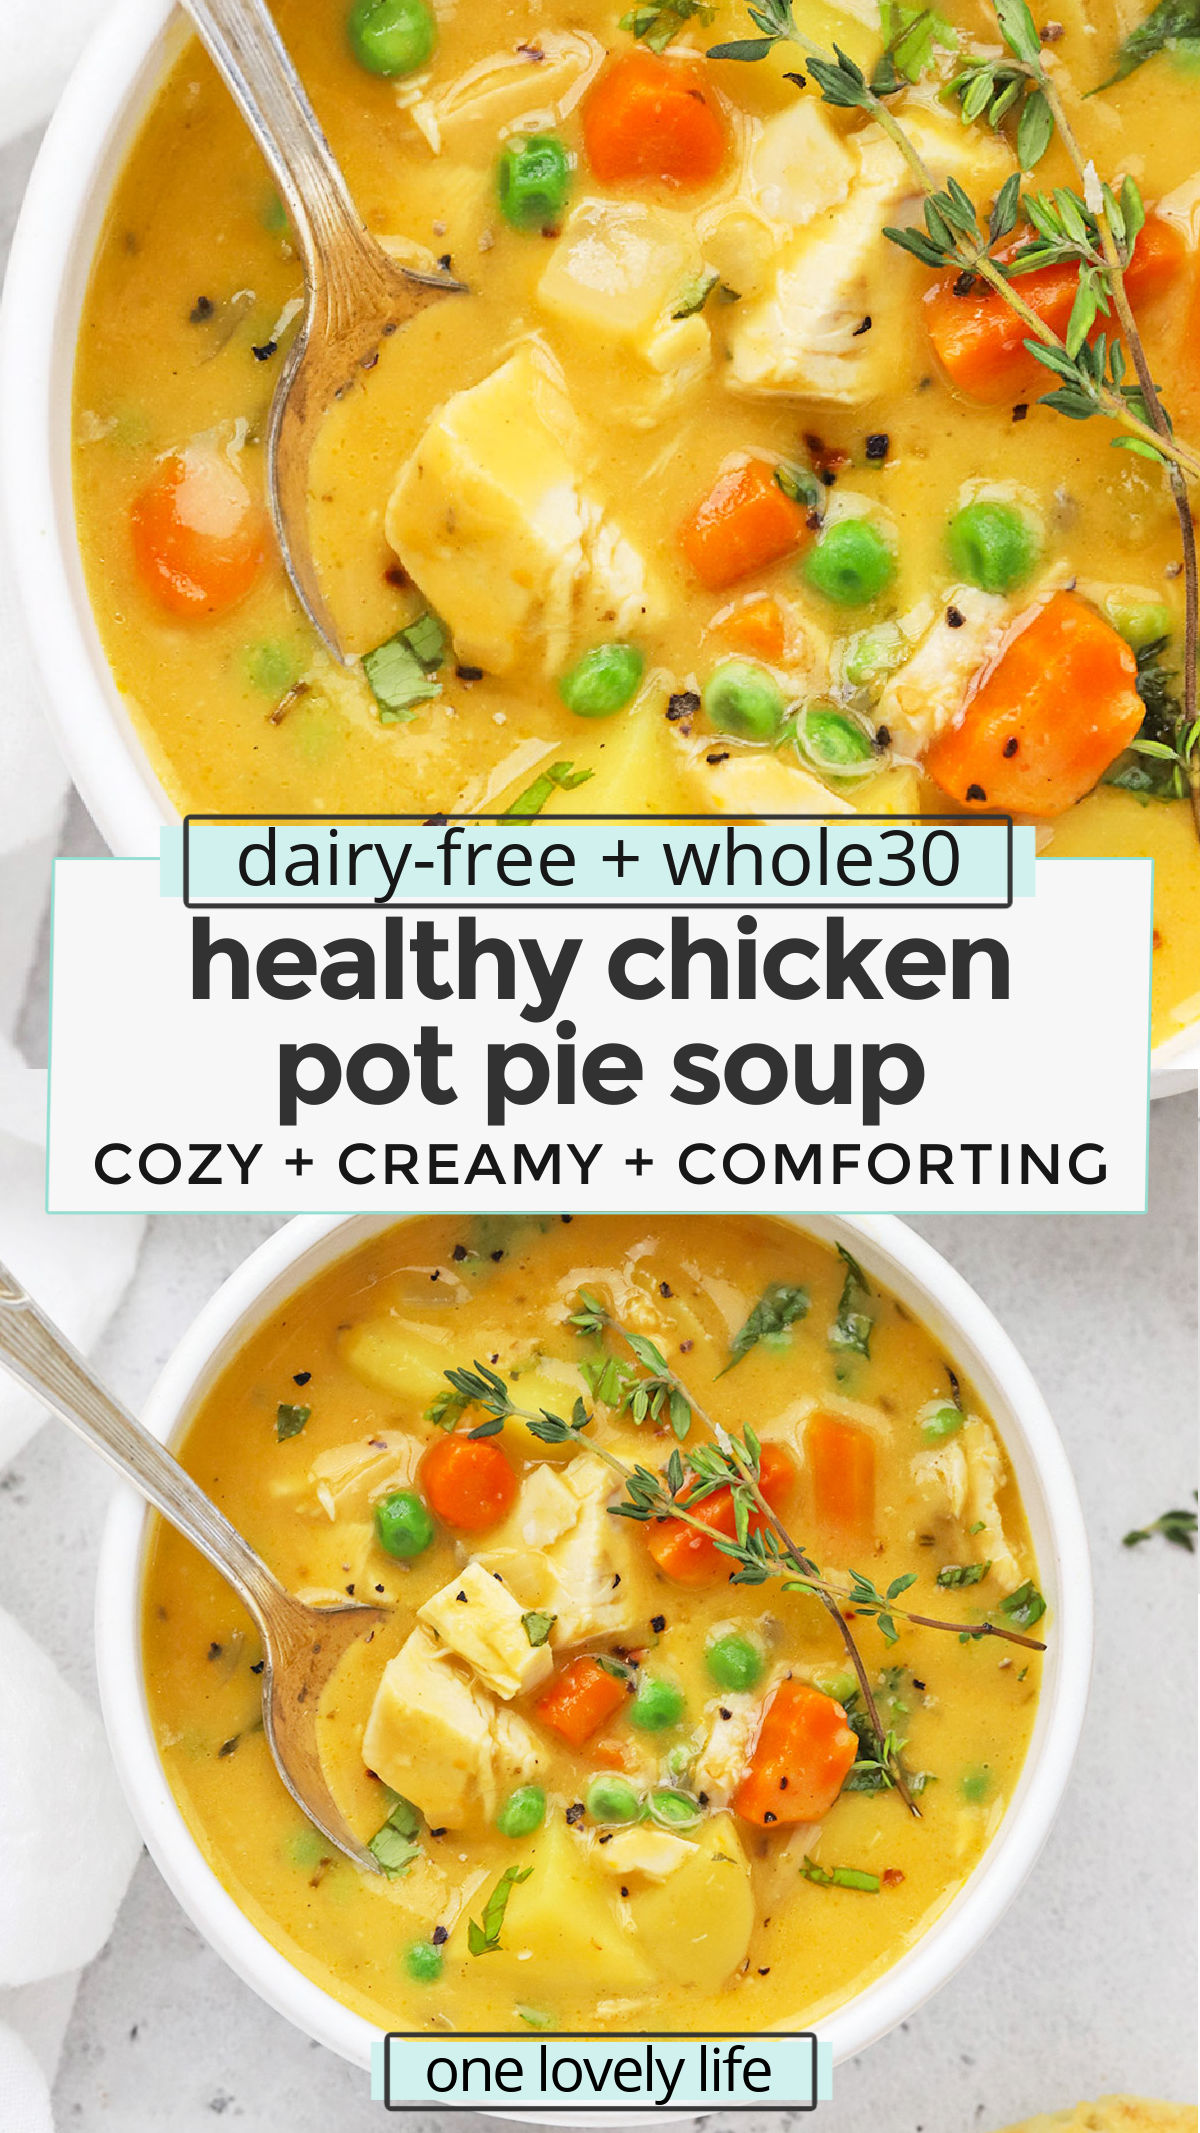 Healthy Chicken Pot Pie Soup - This dairy-free chicken pot pie soup is creamy, delicious, and cozy on a chilly day! (Whole30) // Whole30 Chicken Pot Pie Soup // Healthy Pot Pie Soup // Healthy Turkey Pot Pie Soup // Turkey Leftovers // Thanksgiving Leftovers // Dairy-Free turkey Pot Pie Soup // Whole30 Soup Recipe // Dairy-Free Soup Recipe // Healthy Soup Recipe